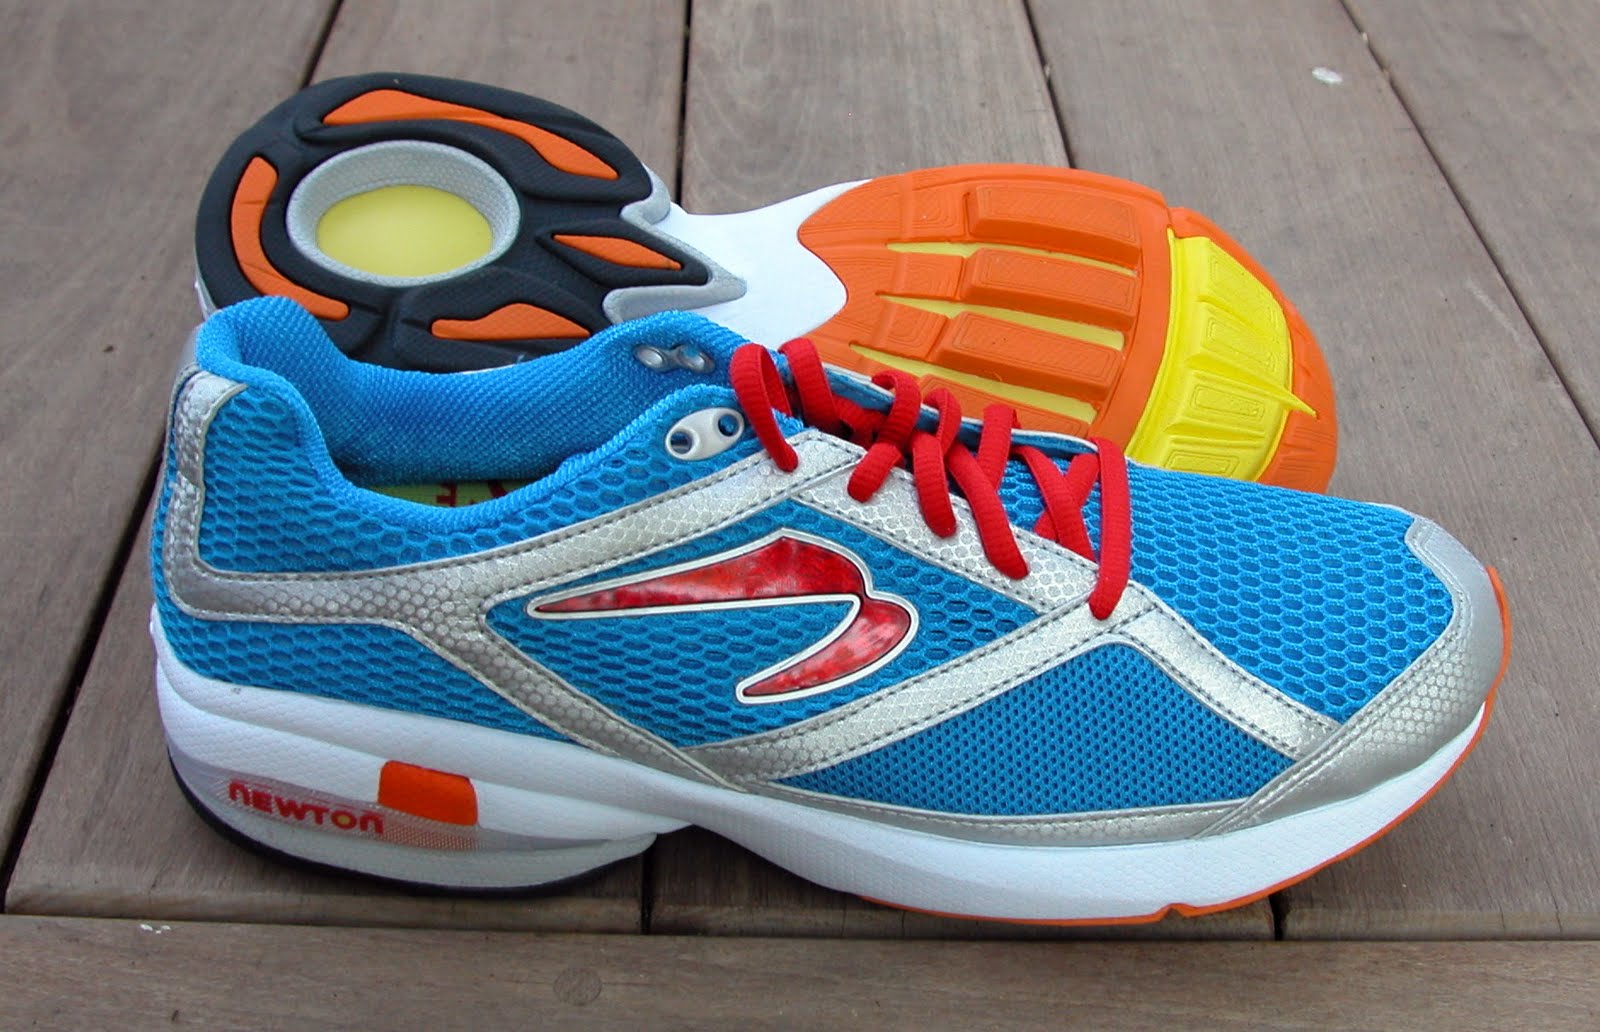 Newton Running Shoes Gravity Reviews